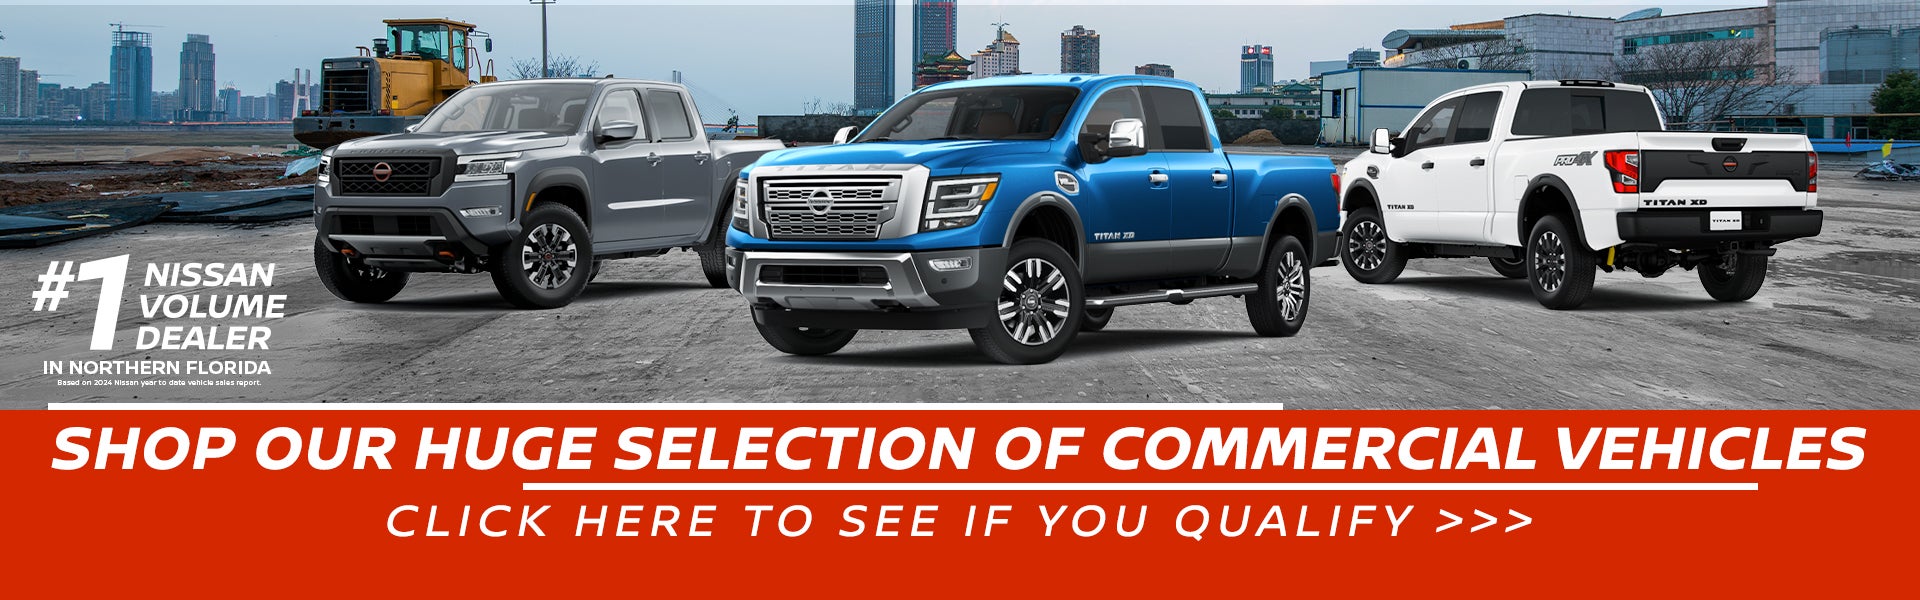 Shop our huge selection of commercial vehicles